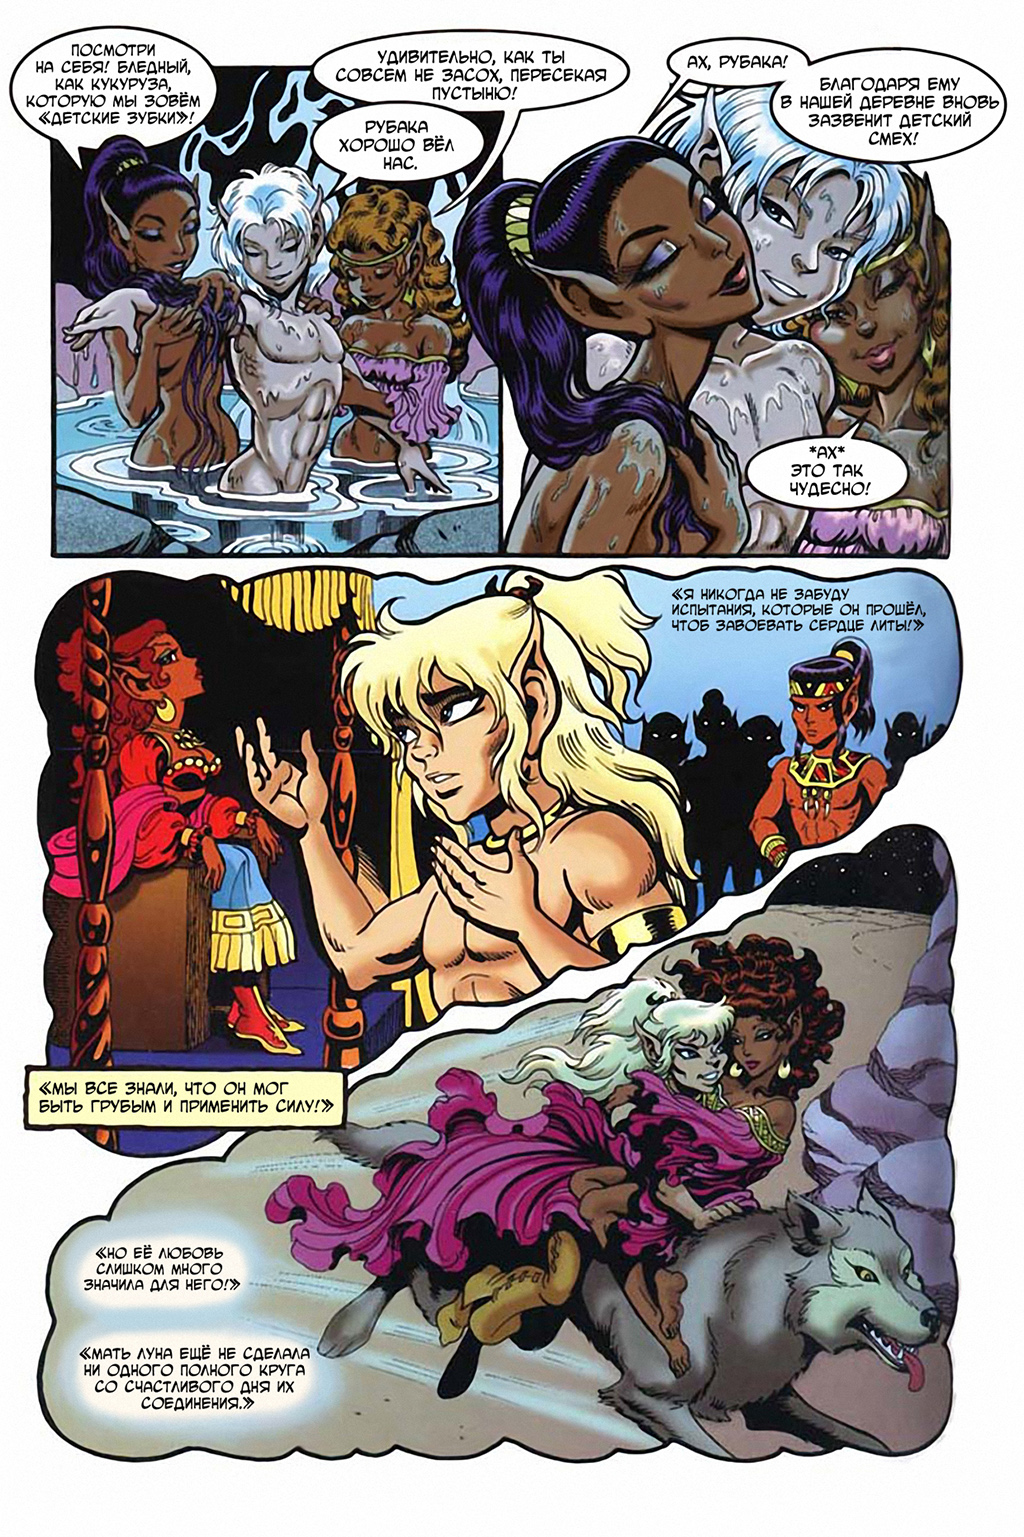 http://img.drawnstories.ru/img/Warp-Graphics/ElfQuest/In-All-But-Blood/In-All-But-Blood-001/051.jpg